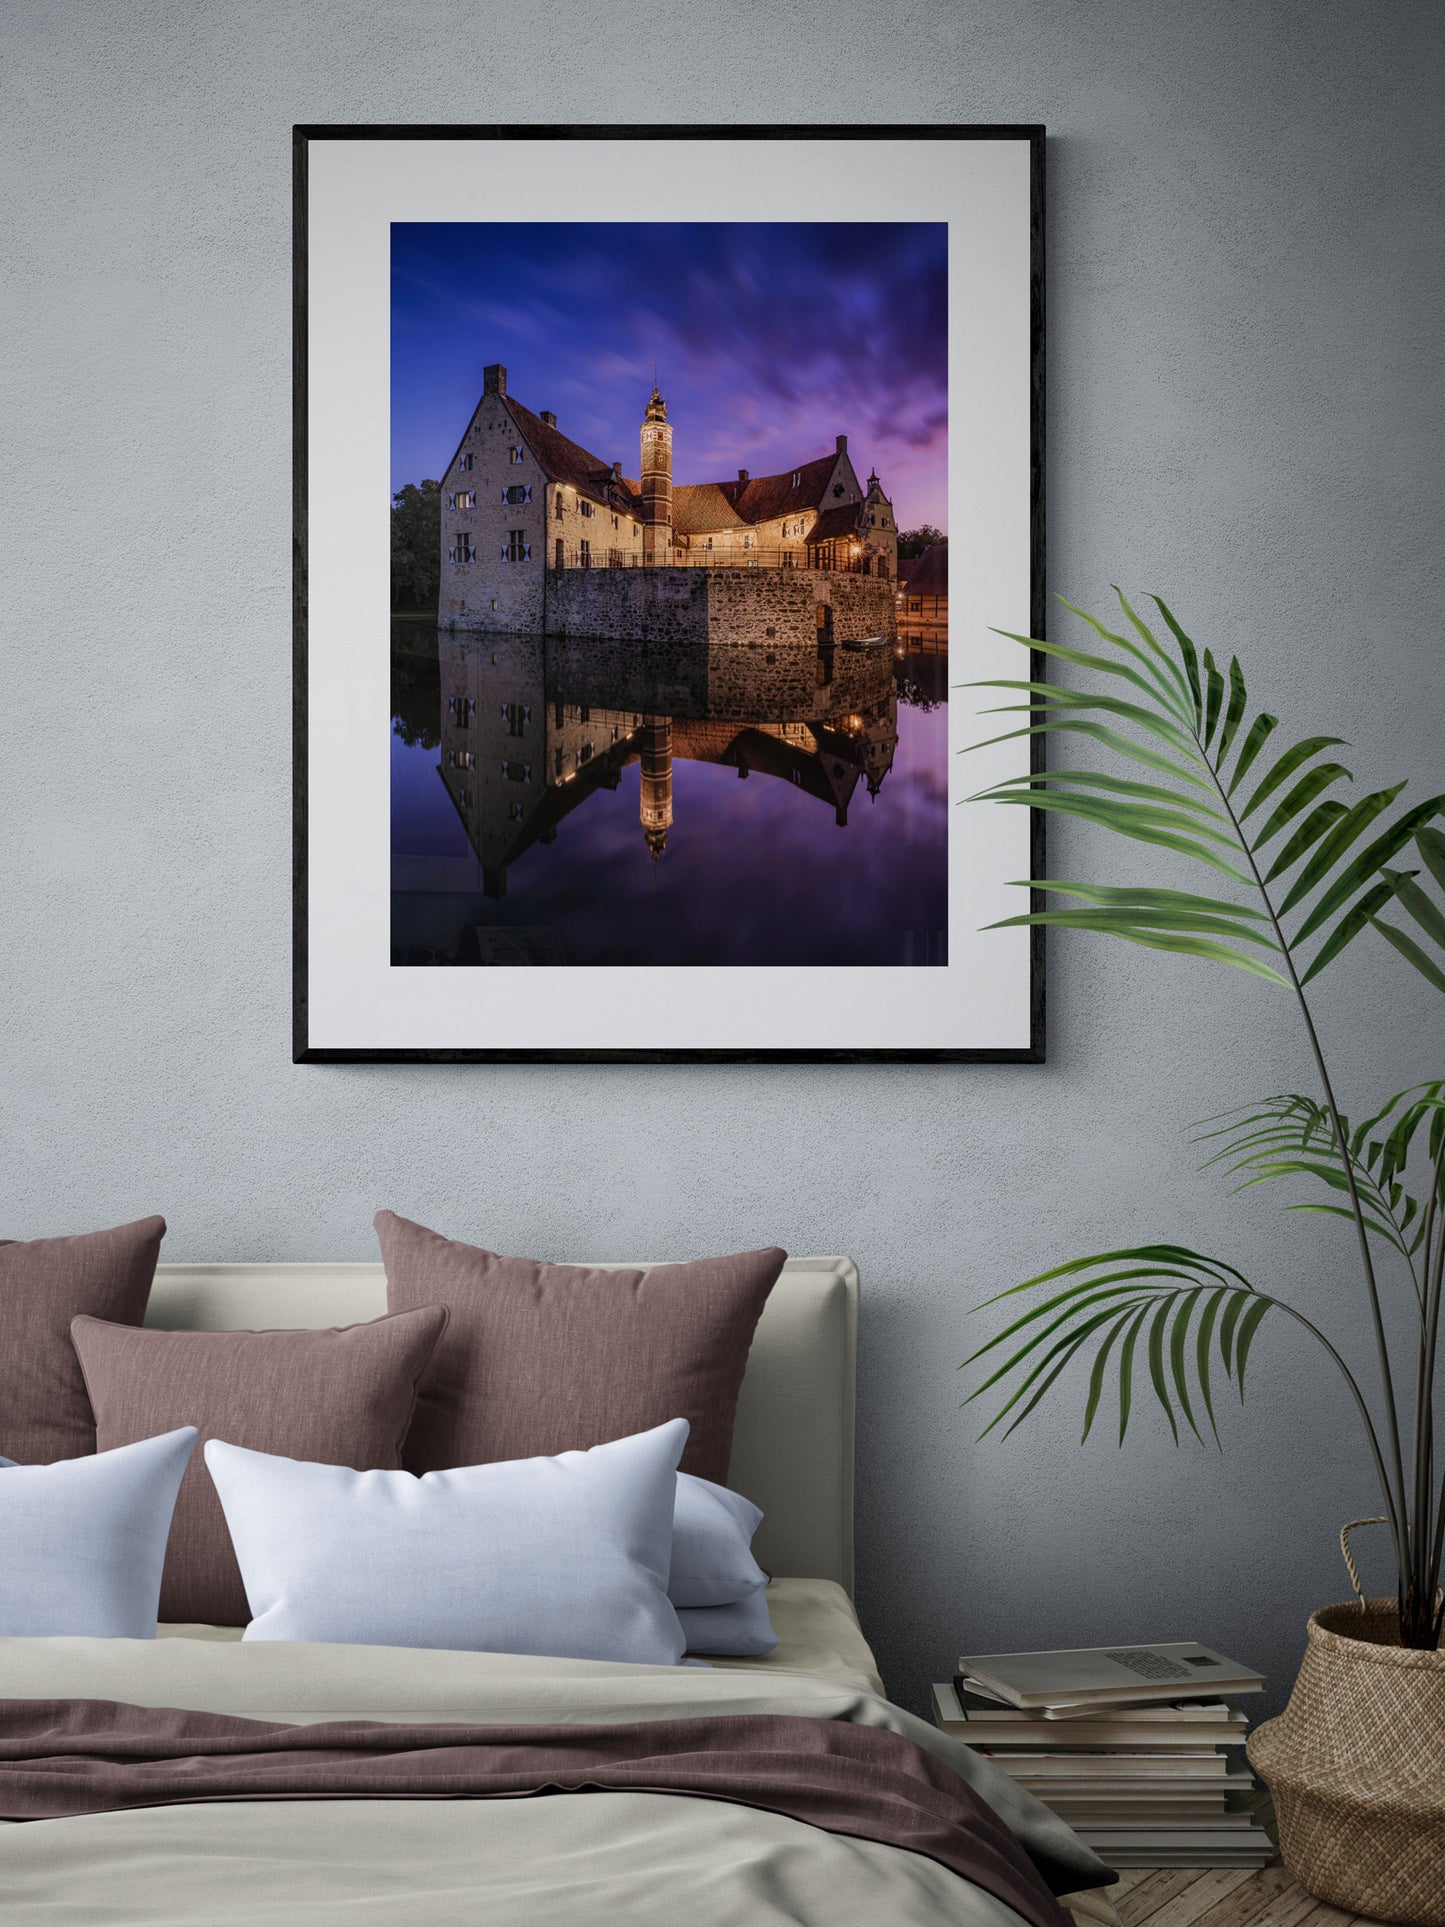 Image Title: Time flies by Photographer: Marcus Danz Location: Lüdinghausen, Germany Image description: Vischering Castle, my home town‘s medieval jewel, shines in all its beauty on this perfect summer evening shortly after sunset. High quality Fine Art print up to 36 inch / around 90 centimeters on Hahnemühle paper available. Large variant in bedroom.